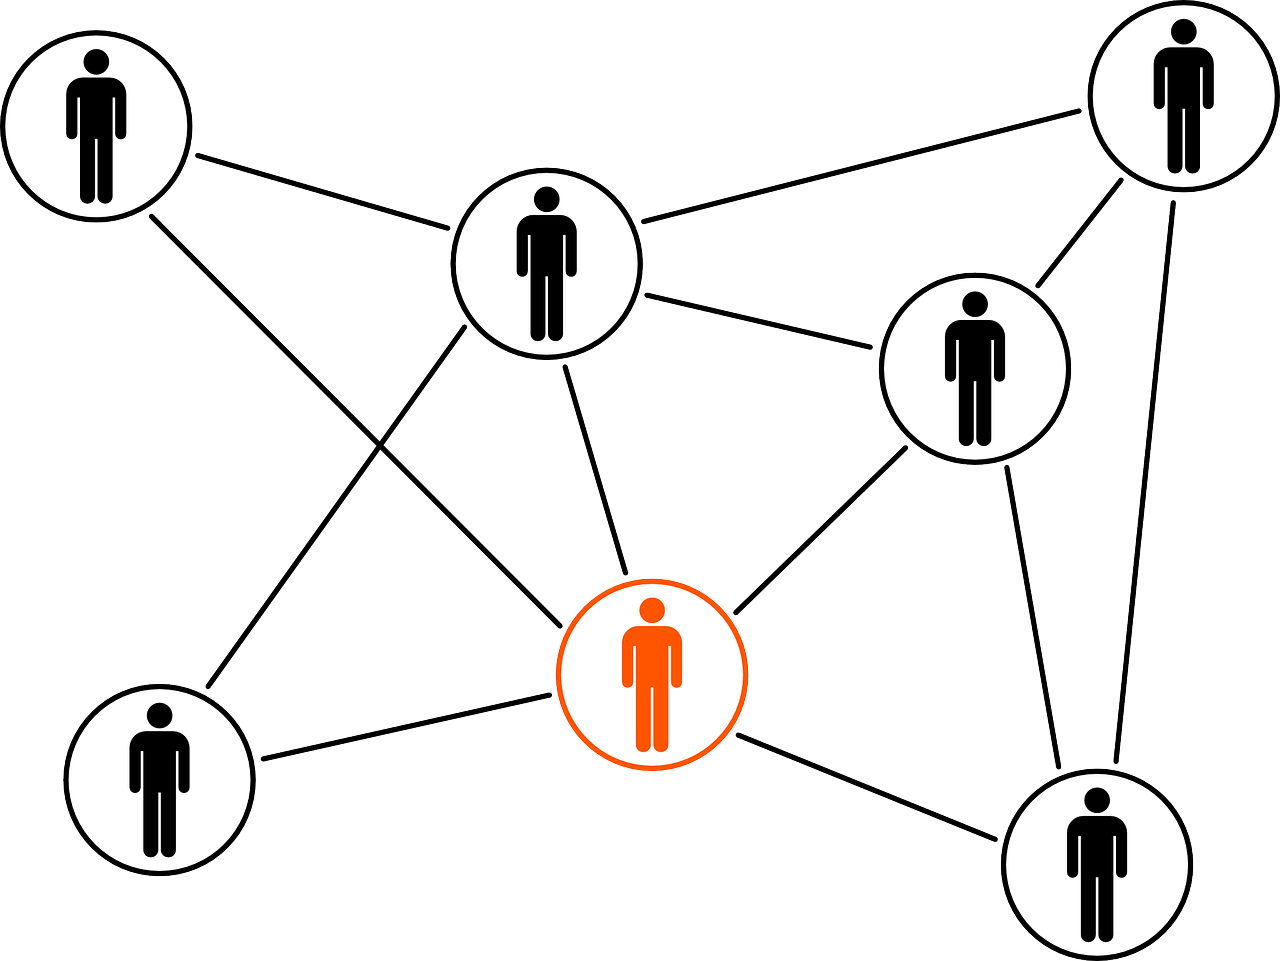 Graphic of icons of people all connected together with one highlighted icon being the customer.